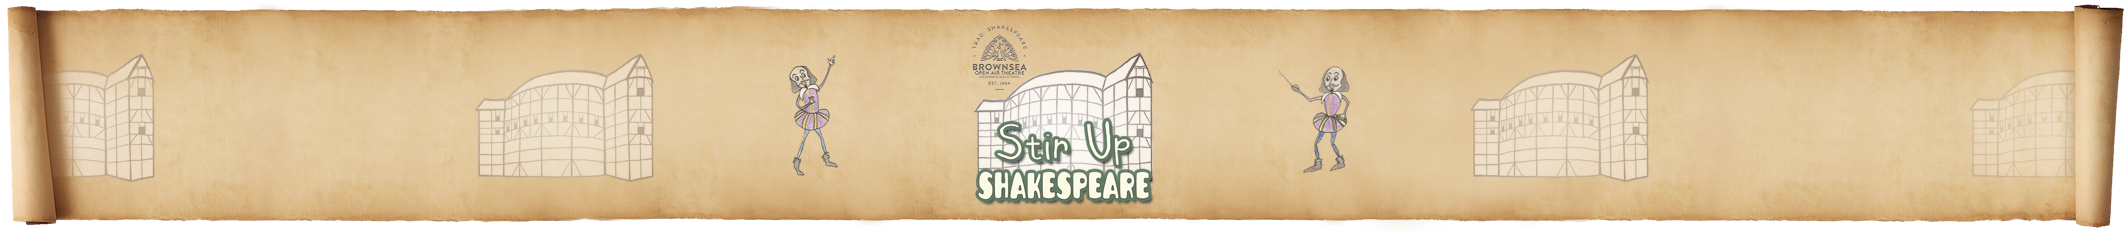 Stir-Up Shakespeare by Brownsea Open Air Theatre